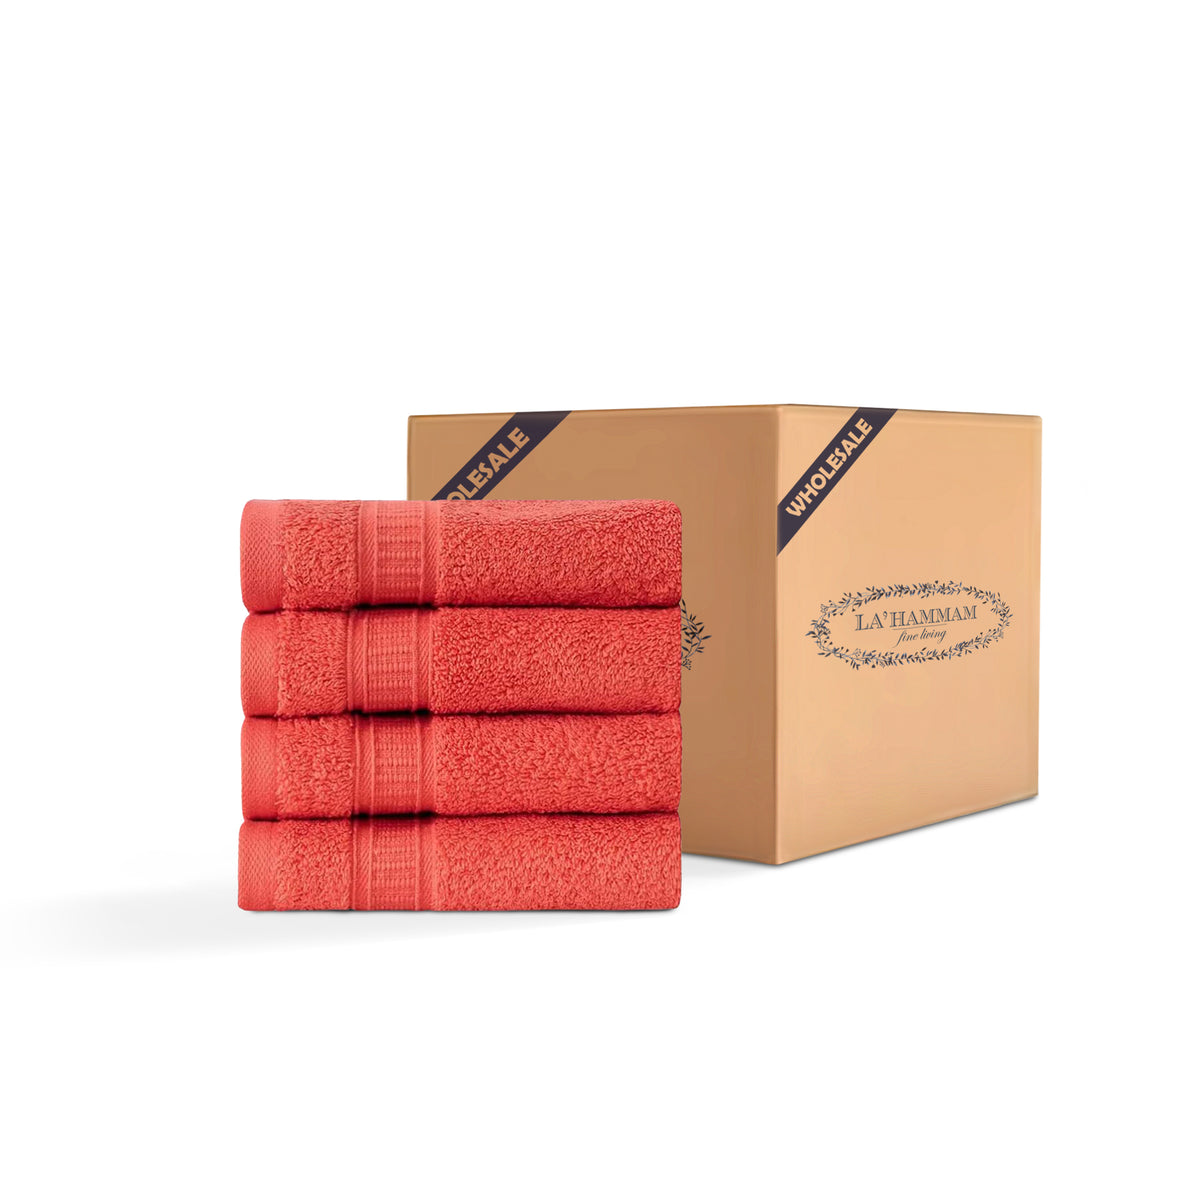 4 piece packed Wash Cloths - 55 pack Case Box